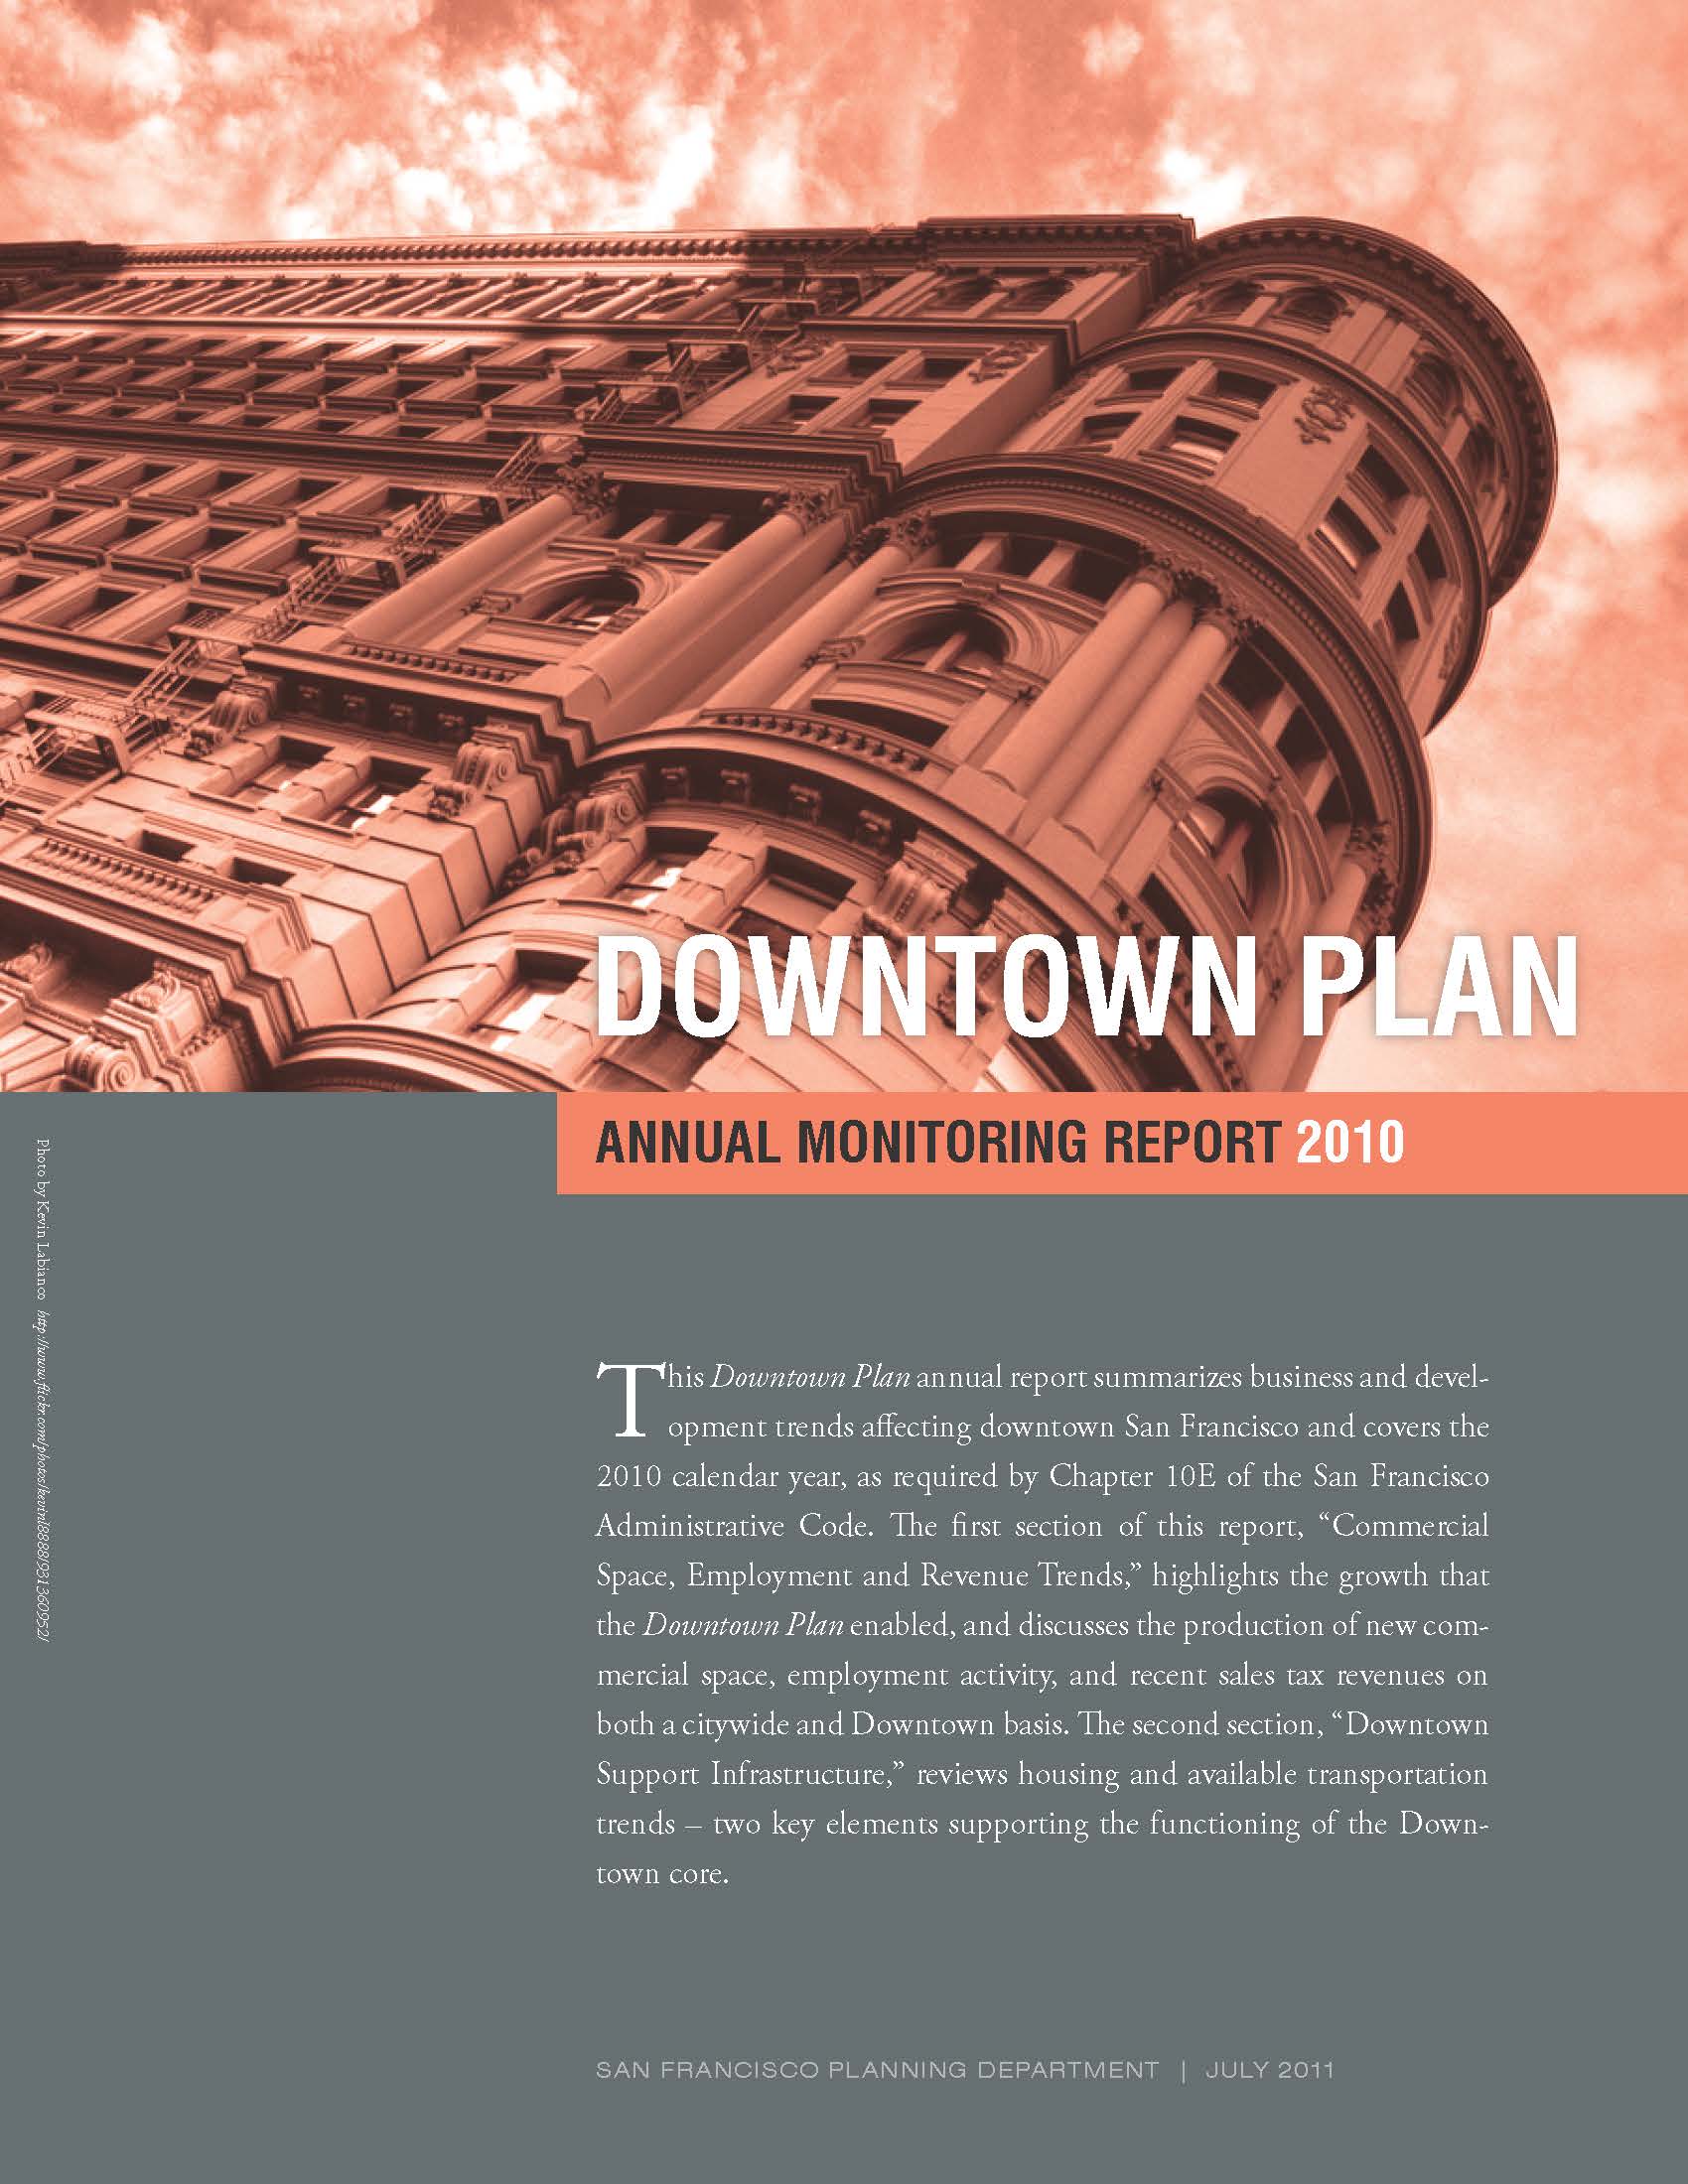 Cover Image for the Downtown Plan Monitoring Report 2010